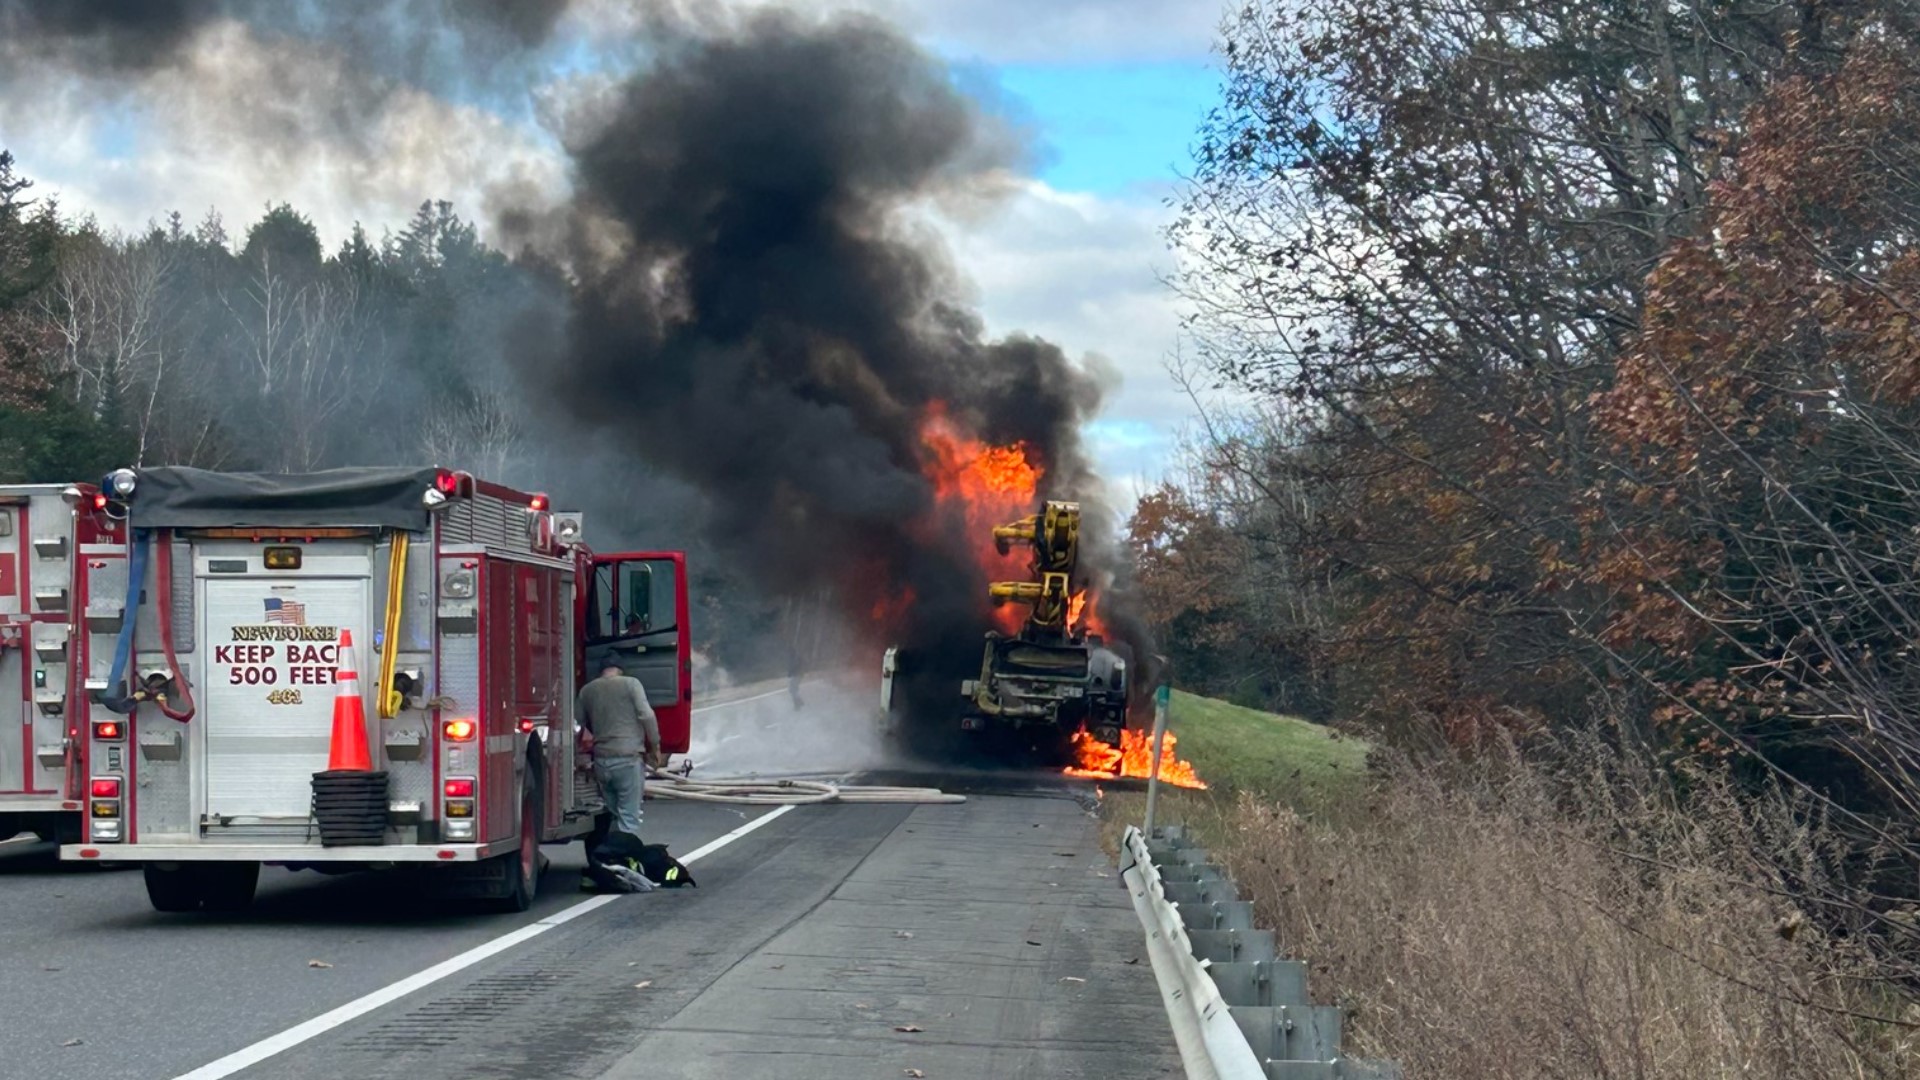 Traffic is being diverted at mile marker 174 off of I-95, Maine State Police said.